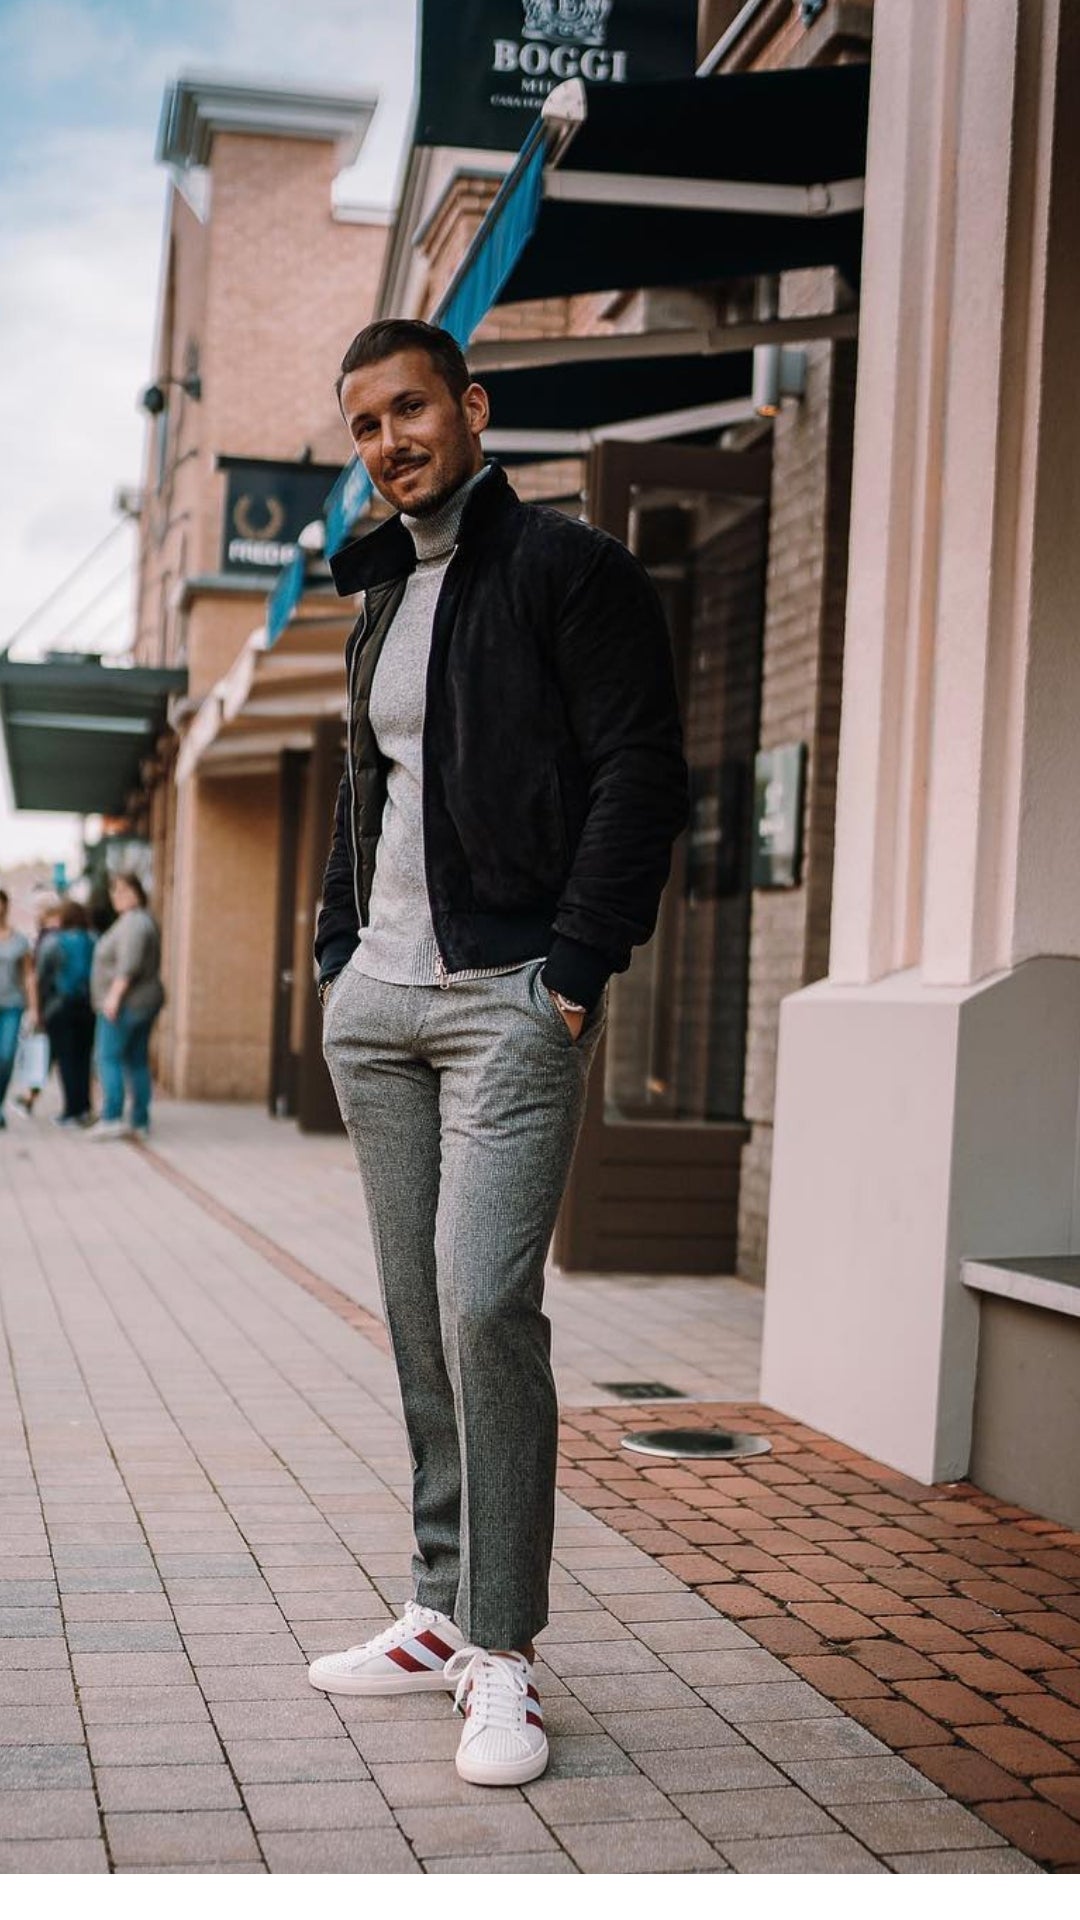 5 Super Cool Fall Outfits To Help To Level Up Your Fall Style #mens #fashion #street #style